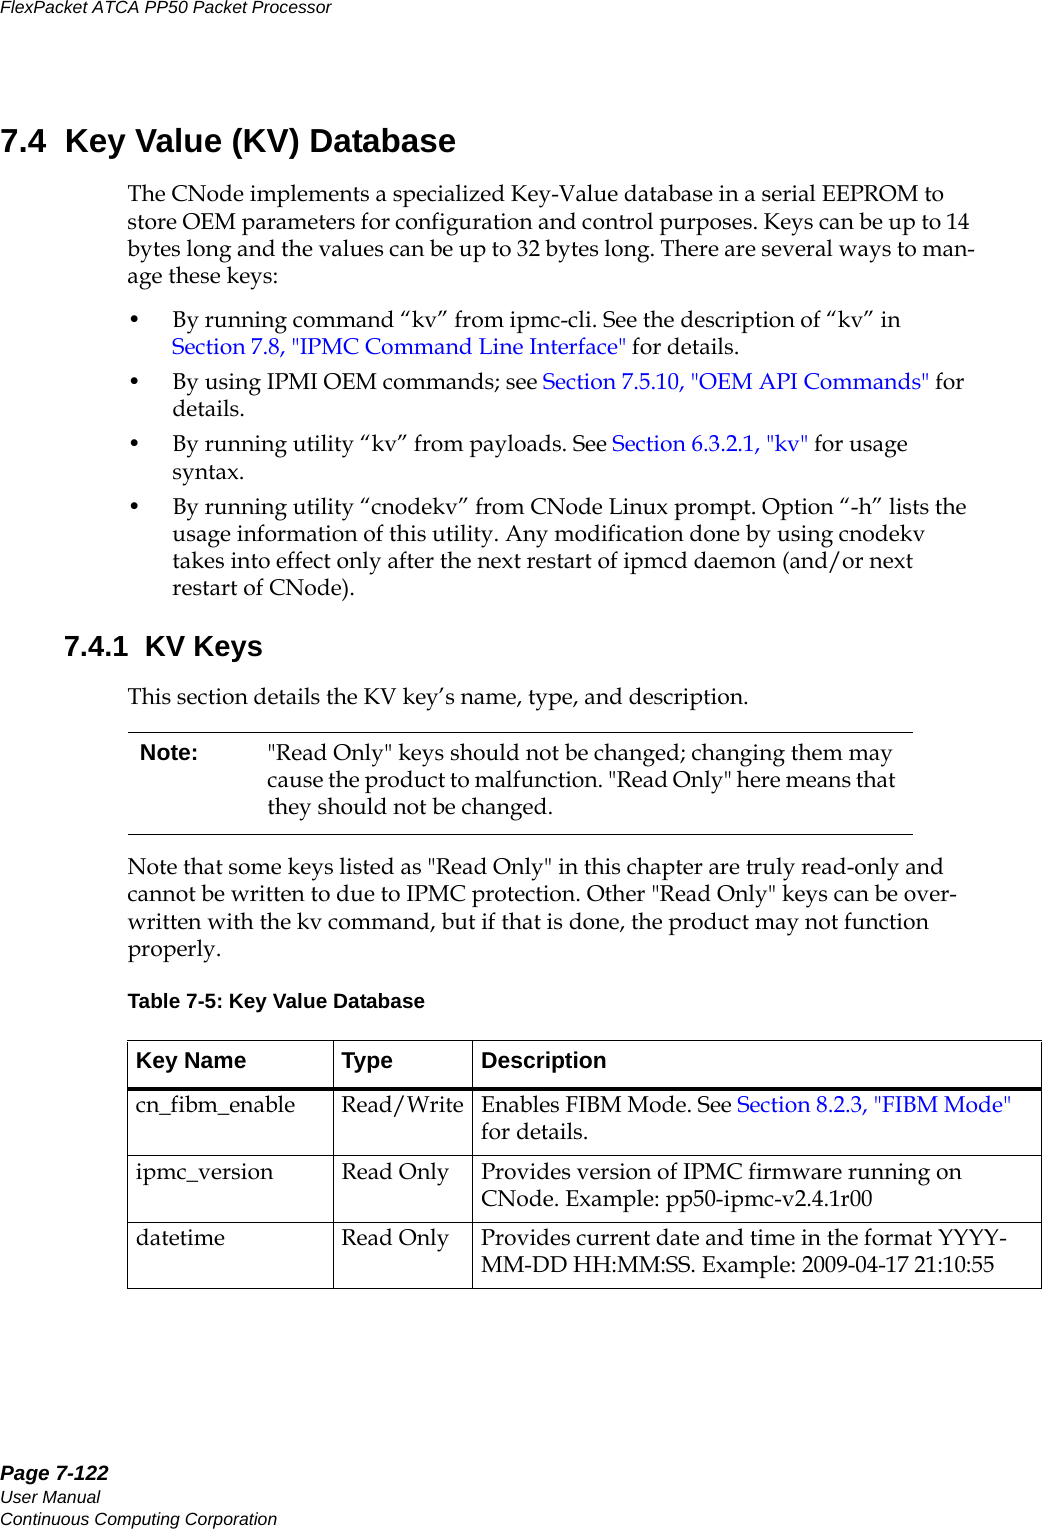 Page 7-122User ManualContinuous Computing CorporationFlexPacket ATCA PP50 Packet Processor     Preliminary7.4  Key Value (KV) DatabaseThe CNode implements a specialized Key-Value database in a serial EEPROM to store OEM parameters for configuration and control purposes. Keys can be up to 14 bytes long and the values can be up to 32 bytes long. There are several ways to man-age these keys:• By running command “kv” from ipmc-cli. See the description of “kv” in Section7.8, &quot;IPMC Command Line Interface&quot; for details. • By using IPMI OEM commands; see Section7.5.10, &quot;OEM API Commands&quot; for details.• By running utility “kv” from payloads. See Section6.3.2.1, &quot;kv&quot; for usage syntax.• By running utility “cnodekv” from CNode Linux prompt. Option “-h” lists the usage information of this utility. Any modification done by using cnodekv takes into effect only after the next restart of ipmcd daemon (and/or next restart of CNode). 7.4.1  KV KeysThis section details the KV key’s name, type, and description. Note that some keys listed as &quot;Read Only&quot; in this chapter are truly read-only and cannot be written to due to IPMC protection. Other &quot;Read Only&quot; keys can be over-written with the kv command, but if that is done, the product may not function properly.Note: &quot;Read Only&quot; keys should not be changed; changing them may cause the product to malfunction. &quot;Read Only&quot; here means that they should not be changed. Table 7-5: Key Value DatabaseKey Name Type Descriptioncn_fibm_enable Read/Write Enables FIBM Mode. See Section8.2.3, &quot;FIBM Mode&quot; for details. ipmc_version Read Only Provides version of IPMC firmware running on CNode. Example: pp50-ipmc-v2.4.1r00datetime Read Only Provides current date and time in the format YYYY-MM-DD HH:MM:SS. Example: 2009-04-17 21:10:55